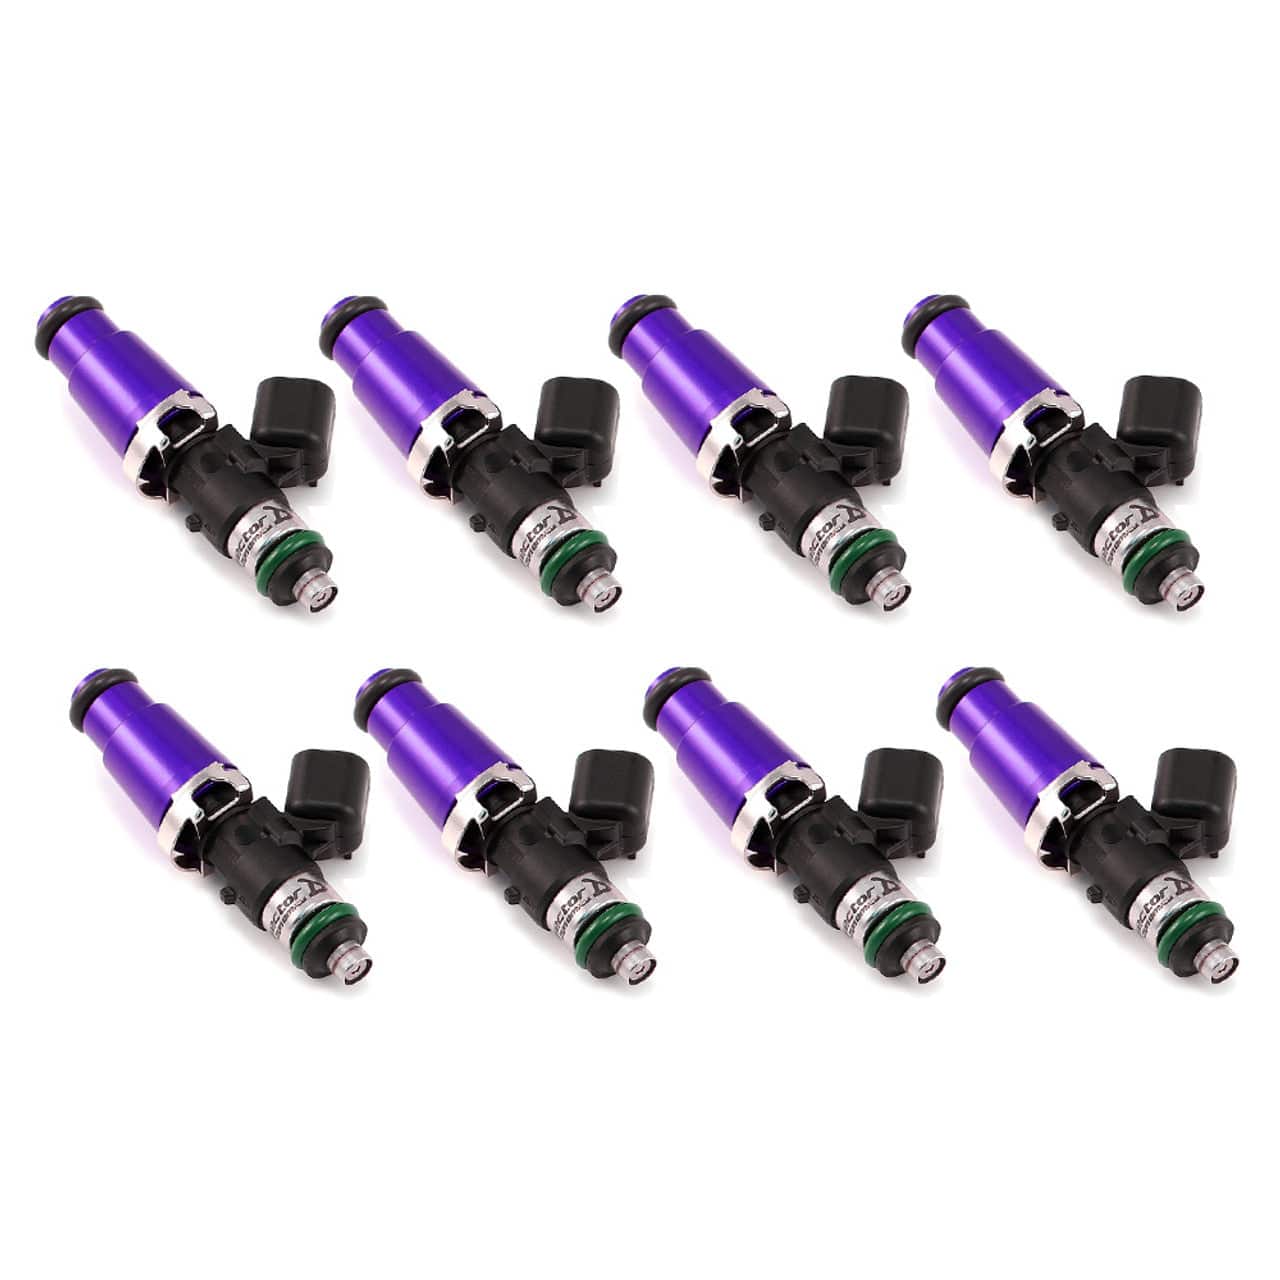 Injector Dynamics ID1300x², for BMW E90 / E92 / E93 M3 2007+, 14mm (grey) adapter top. Set of 8.